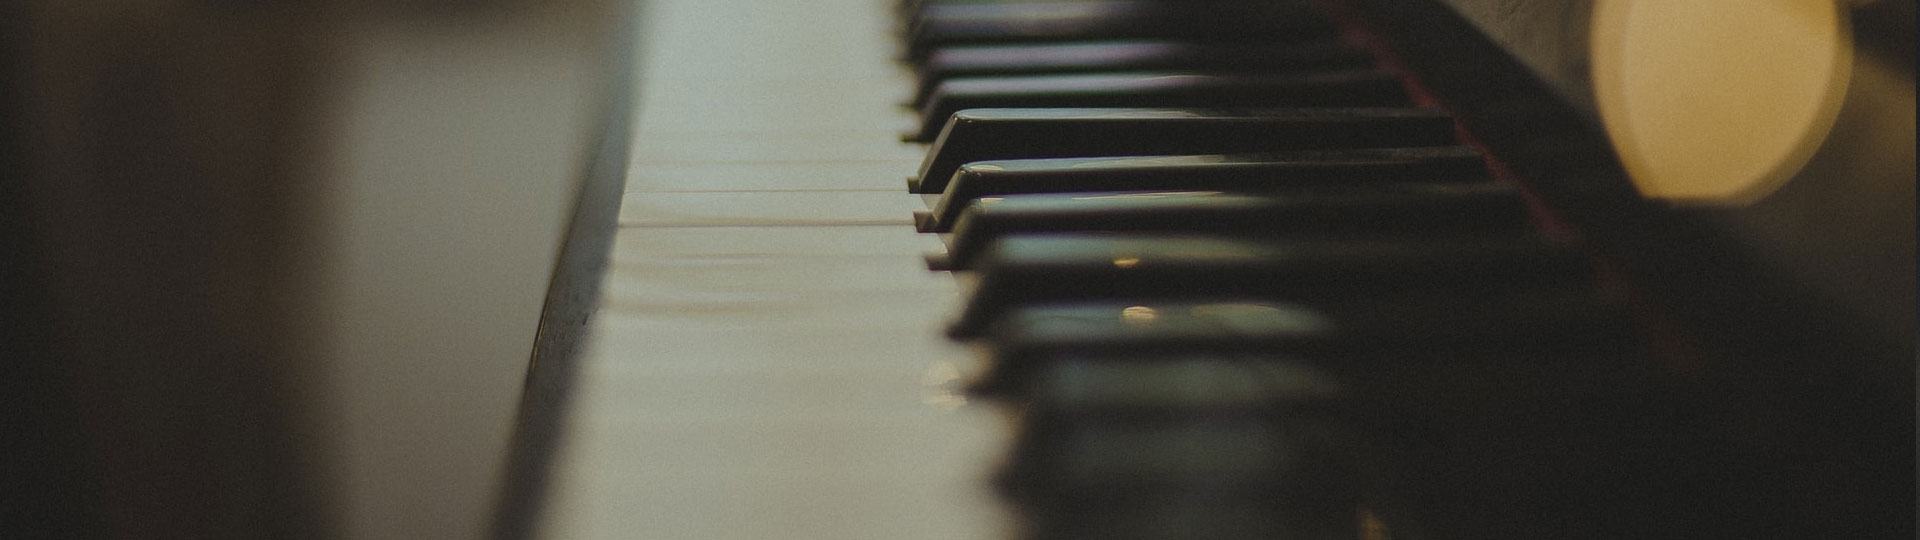 Looking down a piano keyboard. Saltaire Piano Lessons. Private Piano Lessons. Piano Certification
